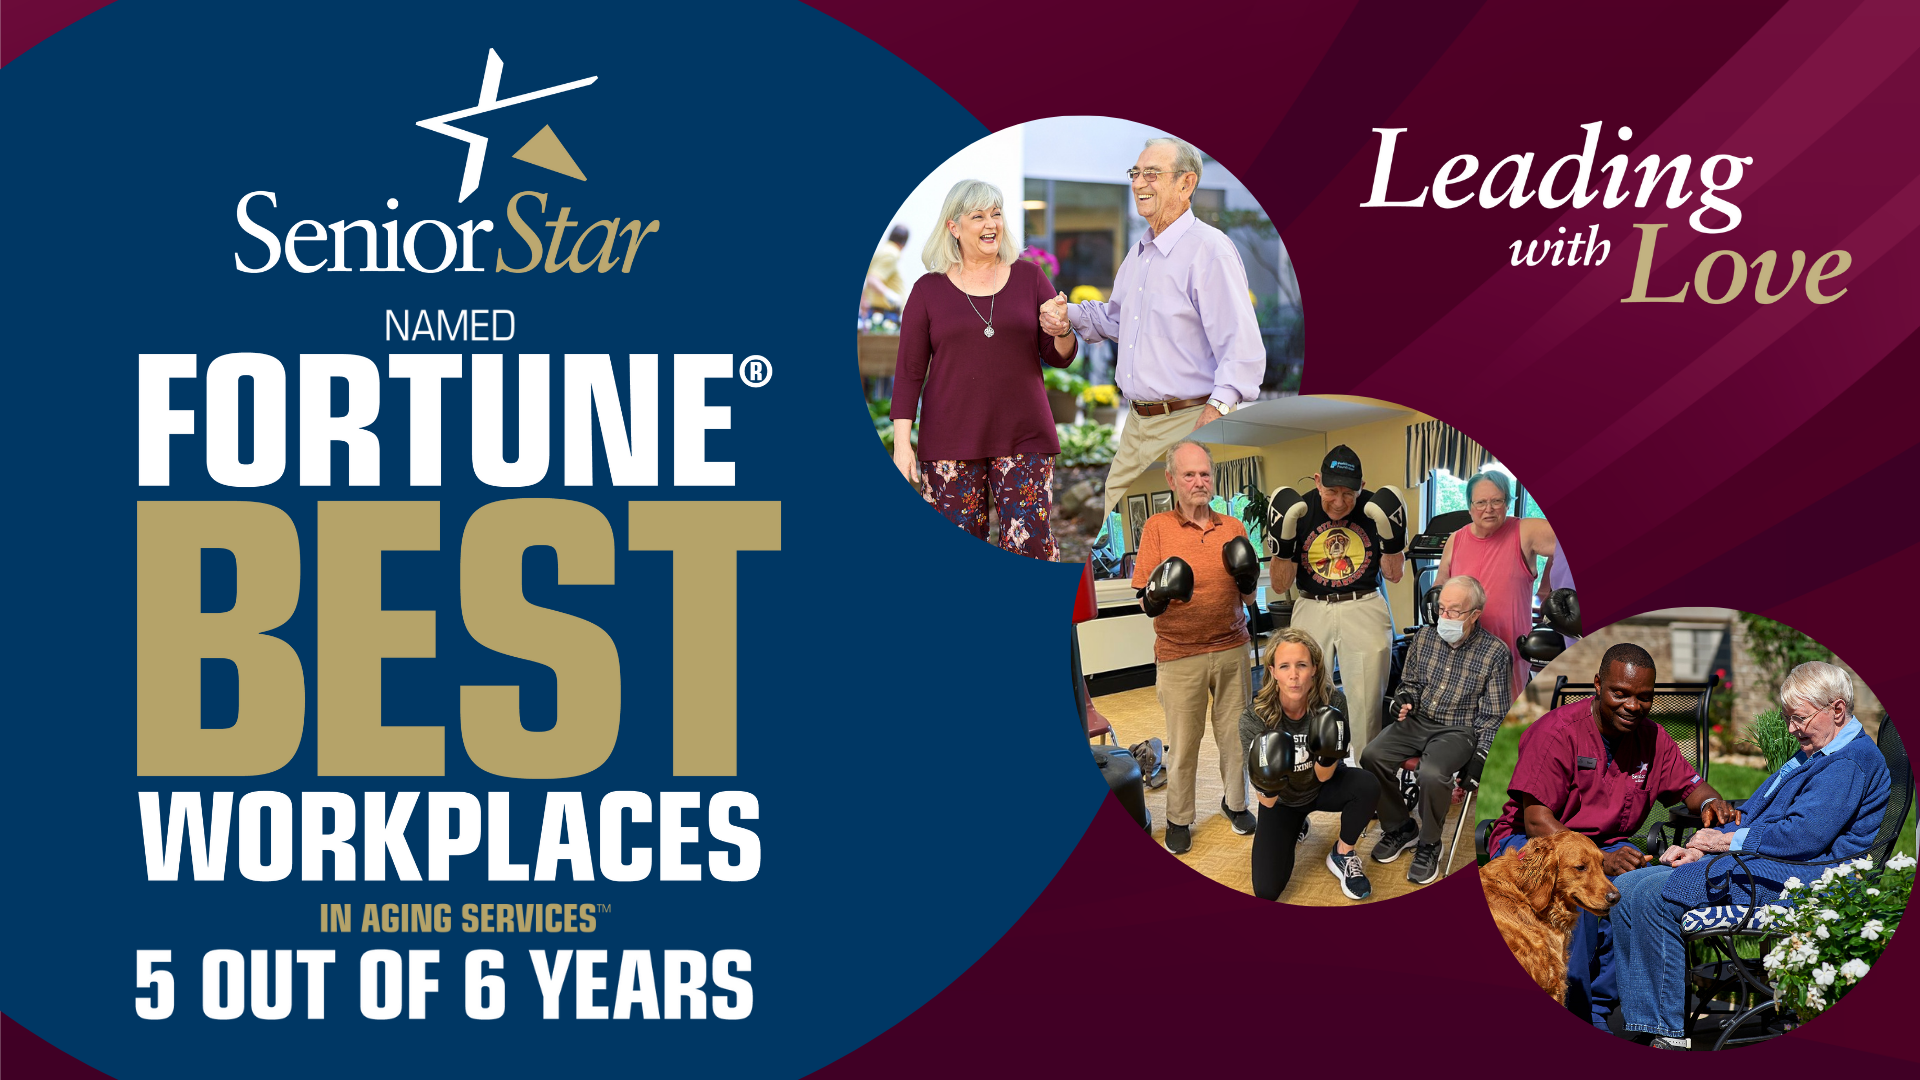 Featured image for “Senior Star named FORTUNE Best Workplaces in Aging Services™ 2023 ~ Leading with Love!”